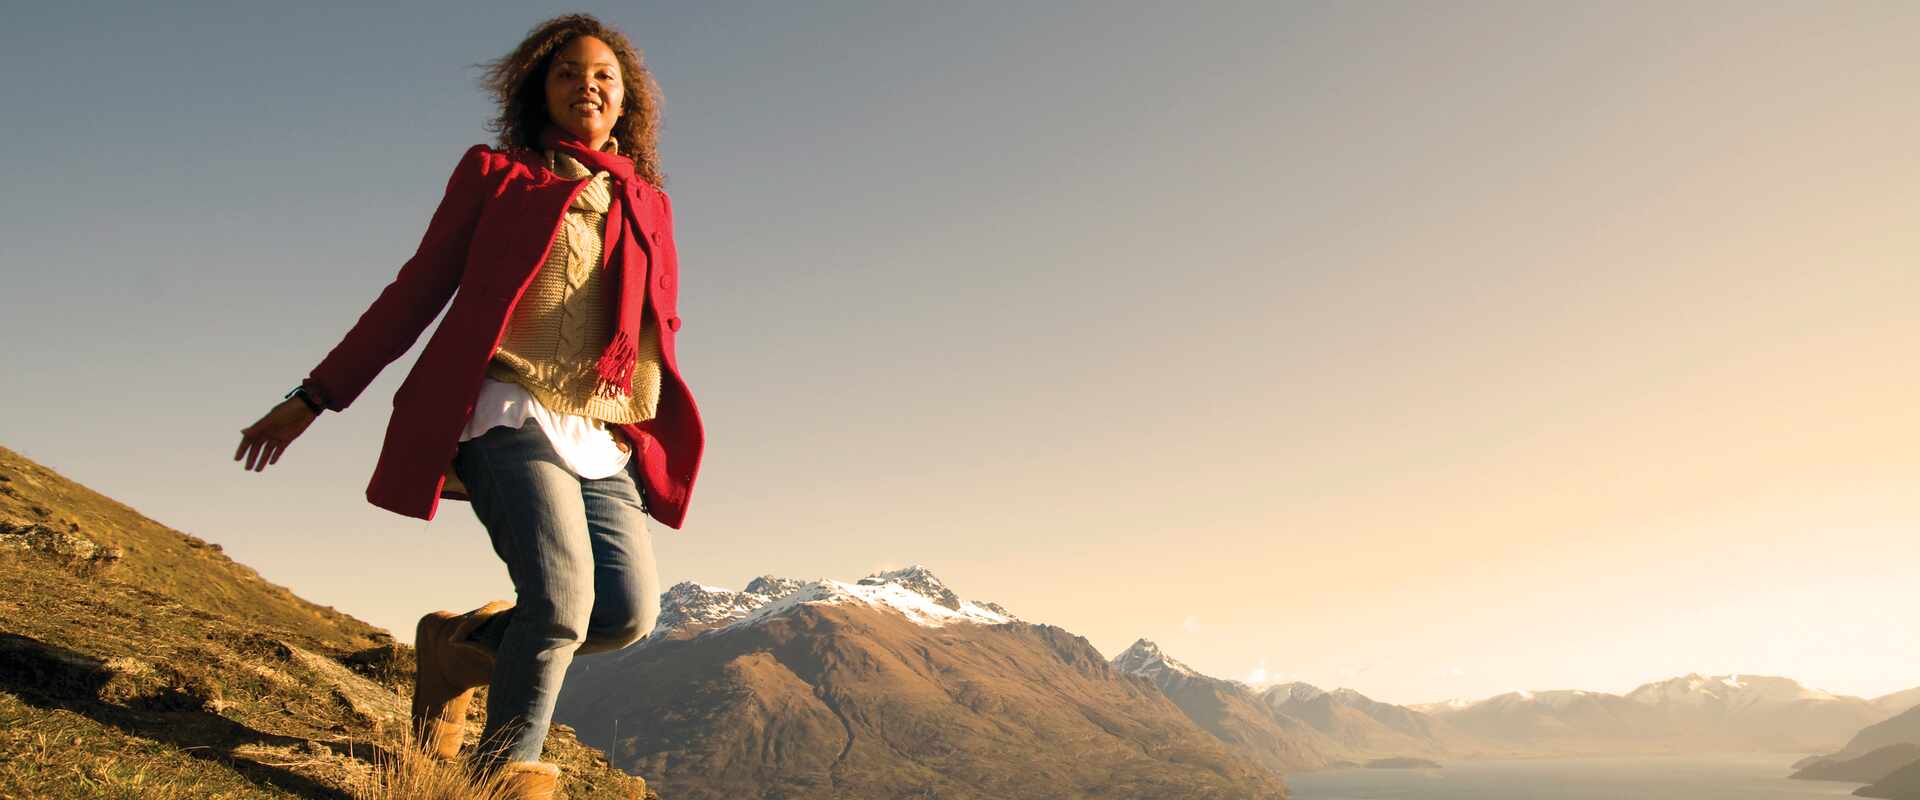 woman in red coat walking on hills with queenstown backdrop new zealand 12 5